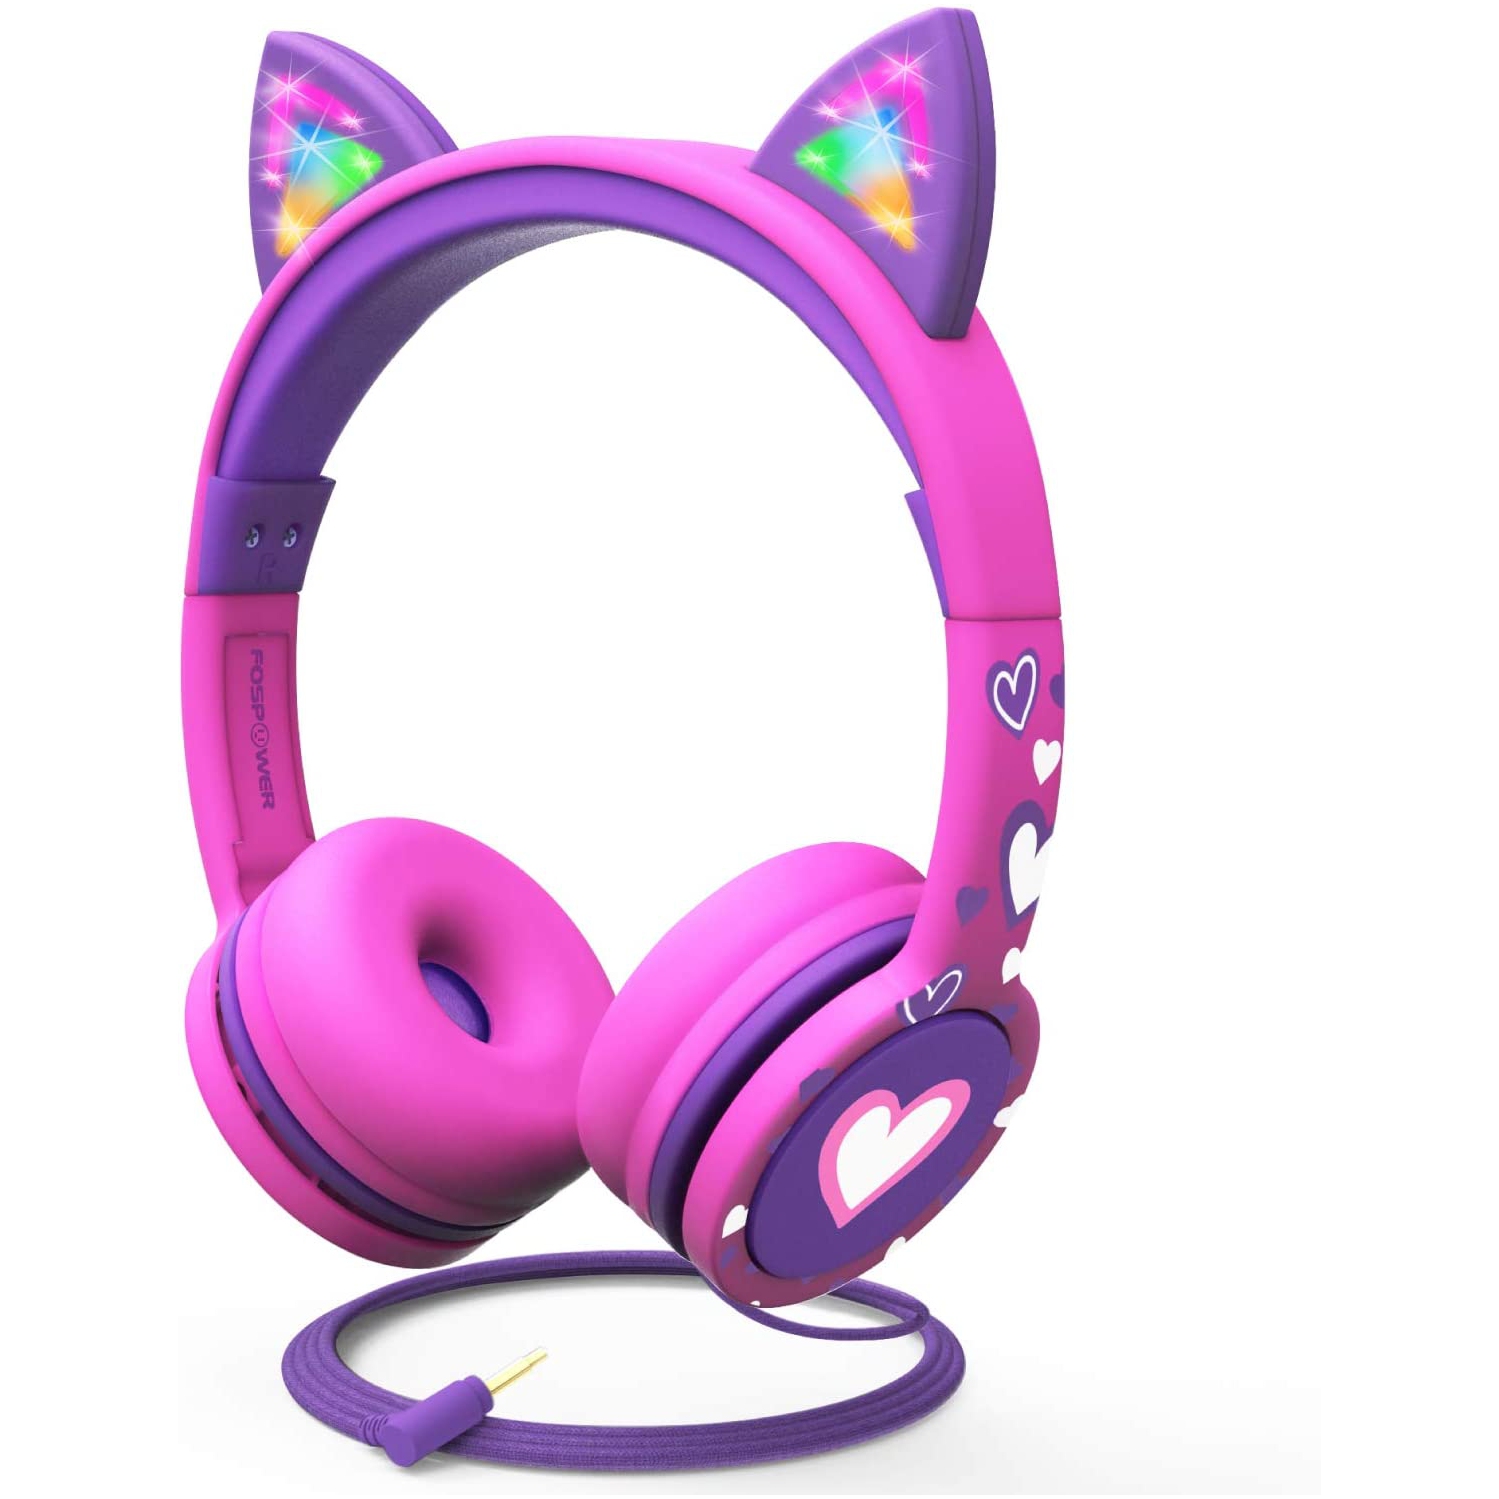 Dolaer Kids Headphones with LED Light Up Cat Ears 3.5mm On Ear Audio Headphones for Kids with Laced Tangle Free Cable (Max 85dB) - Hot Pink/Purple